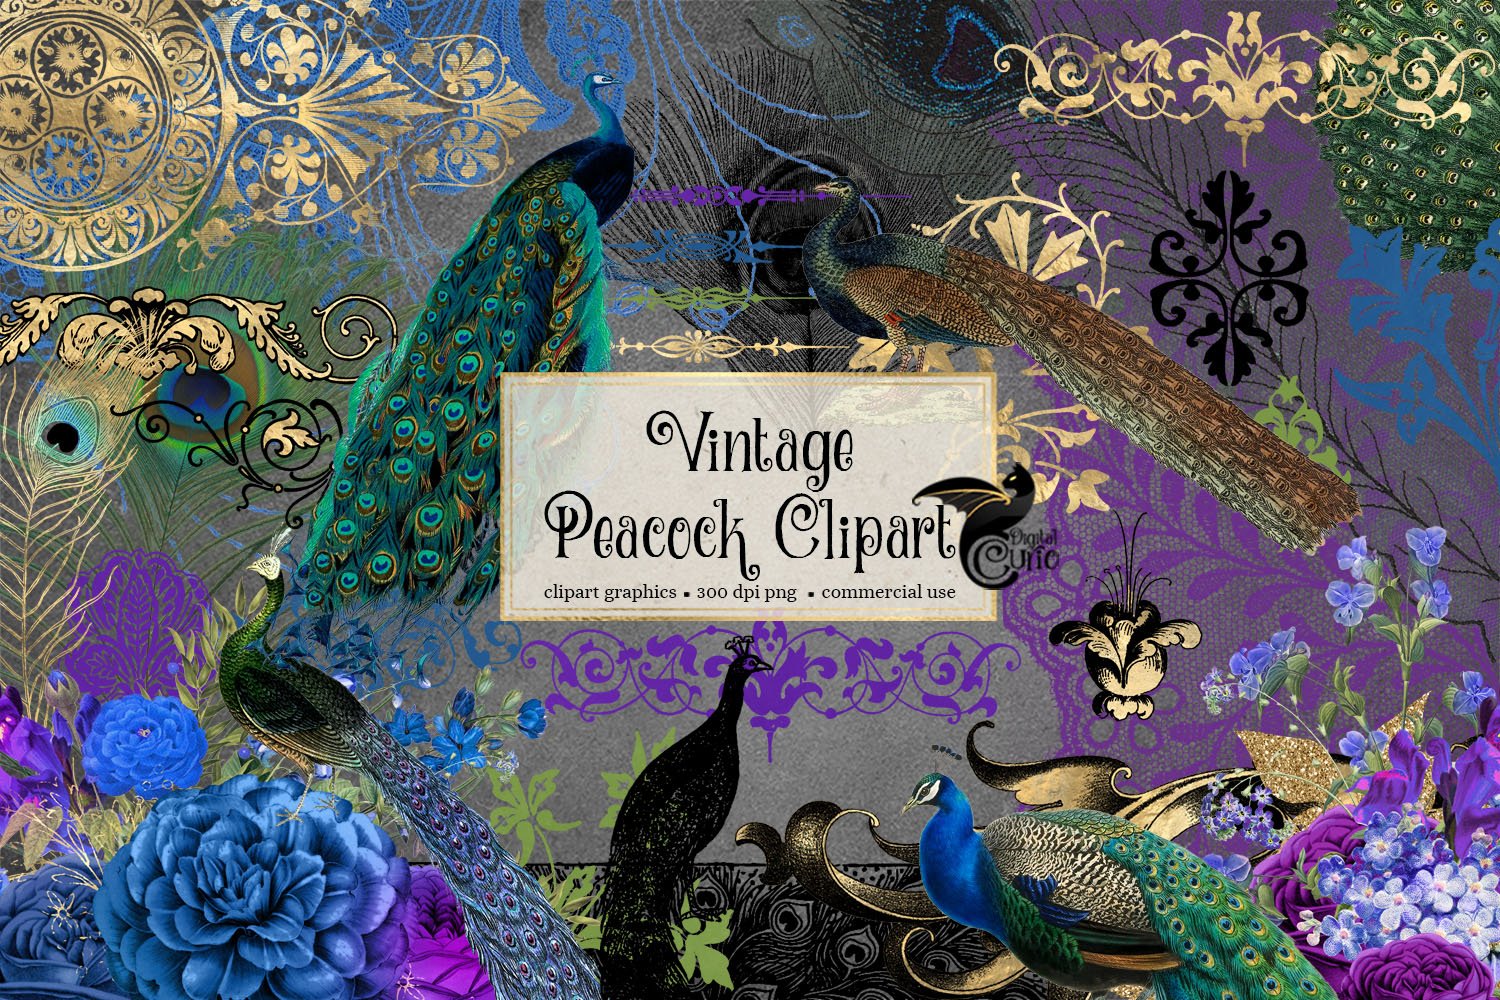 Vintage Peacock Clipart preview image.